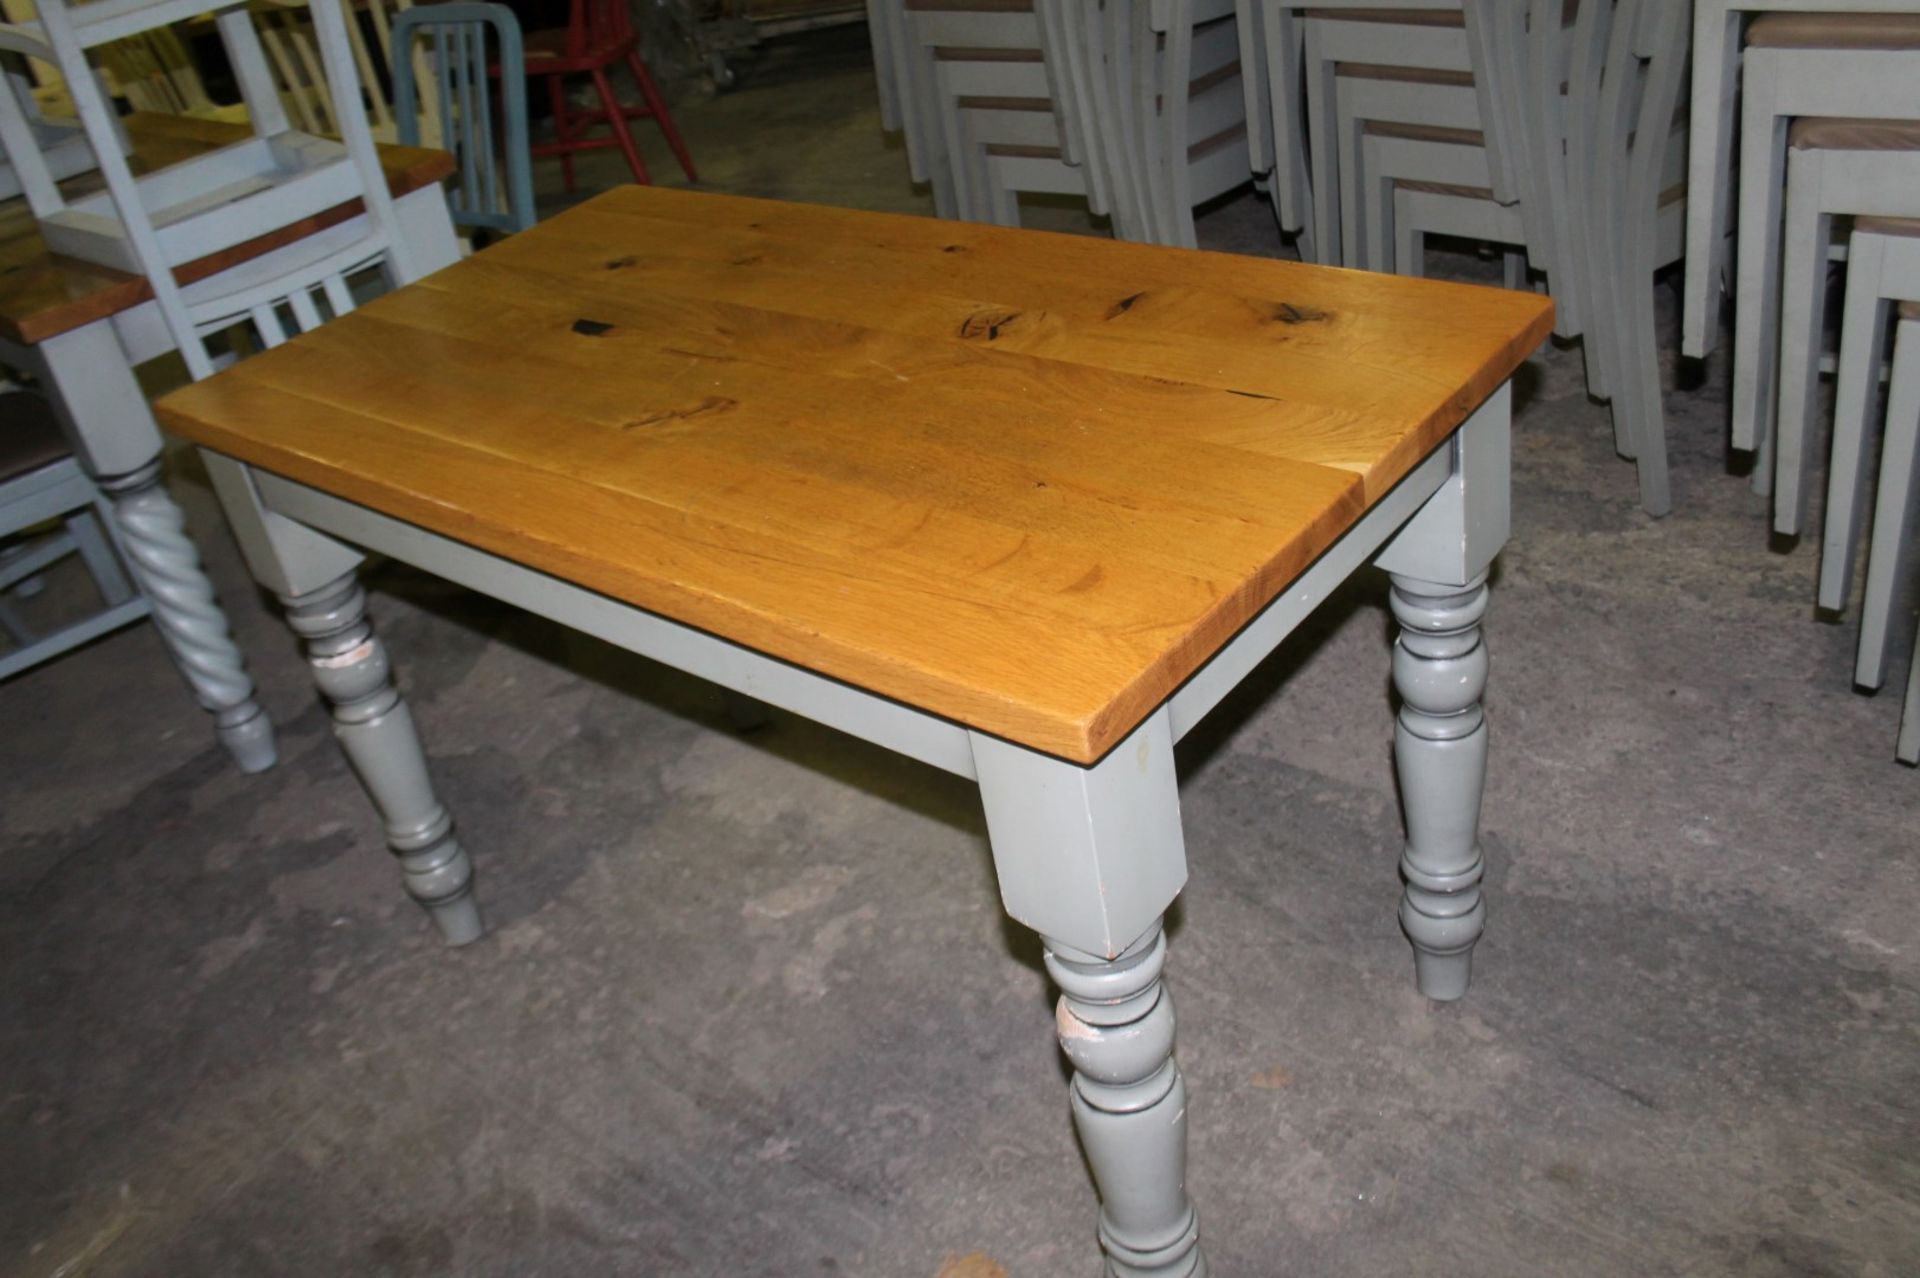 1 x Solid Wood Farmhouse Dining Table With 4 x Chairs Features Solid Oak Table Top and Upholstered - Image 3 of 6